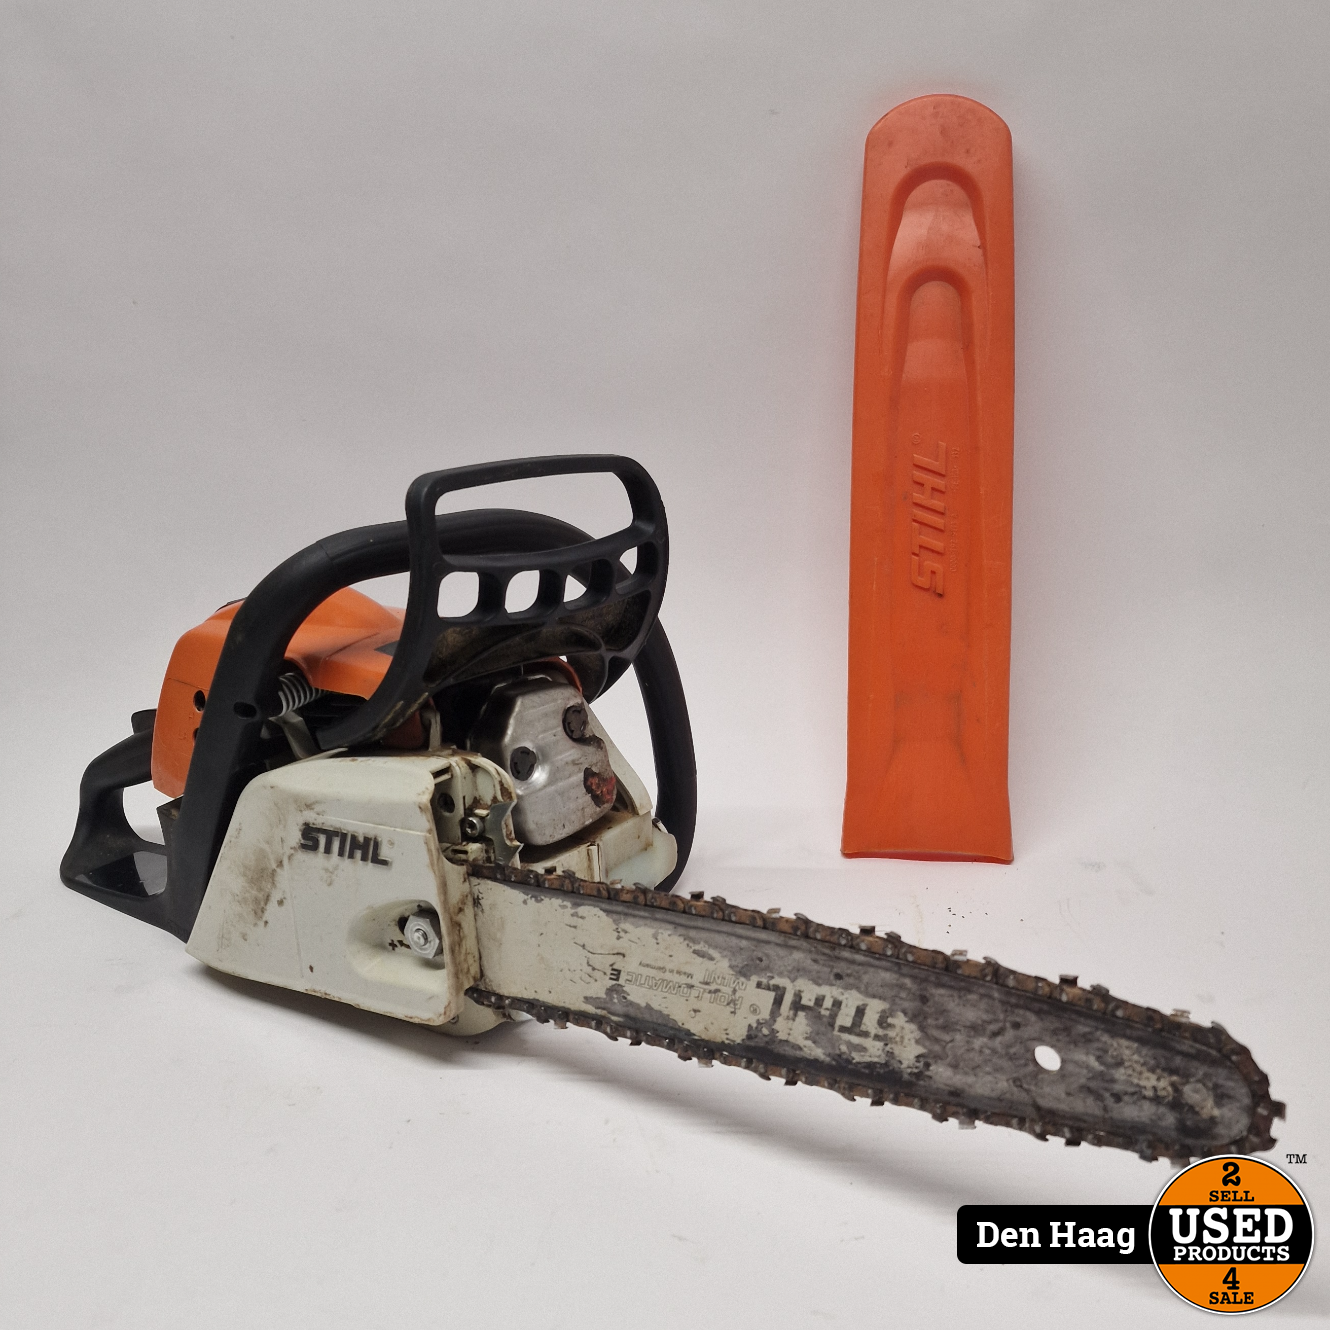 STIHL MS 211 BENZINE KETTINGZAAG | nette staat - Used Products Den Haag